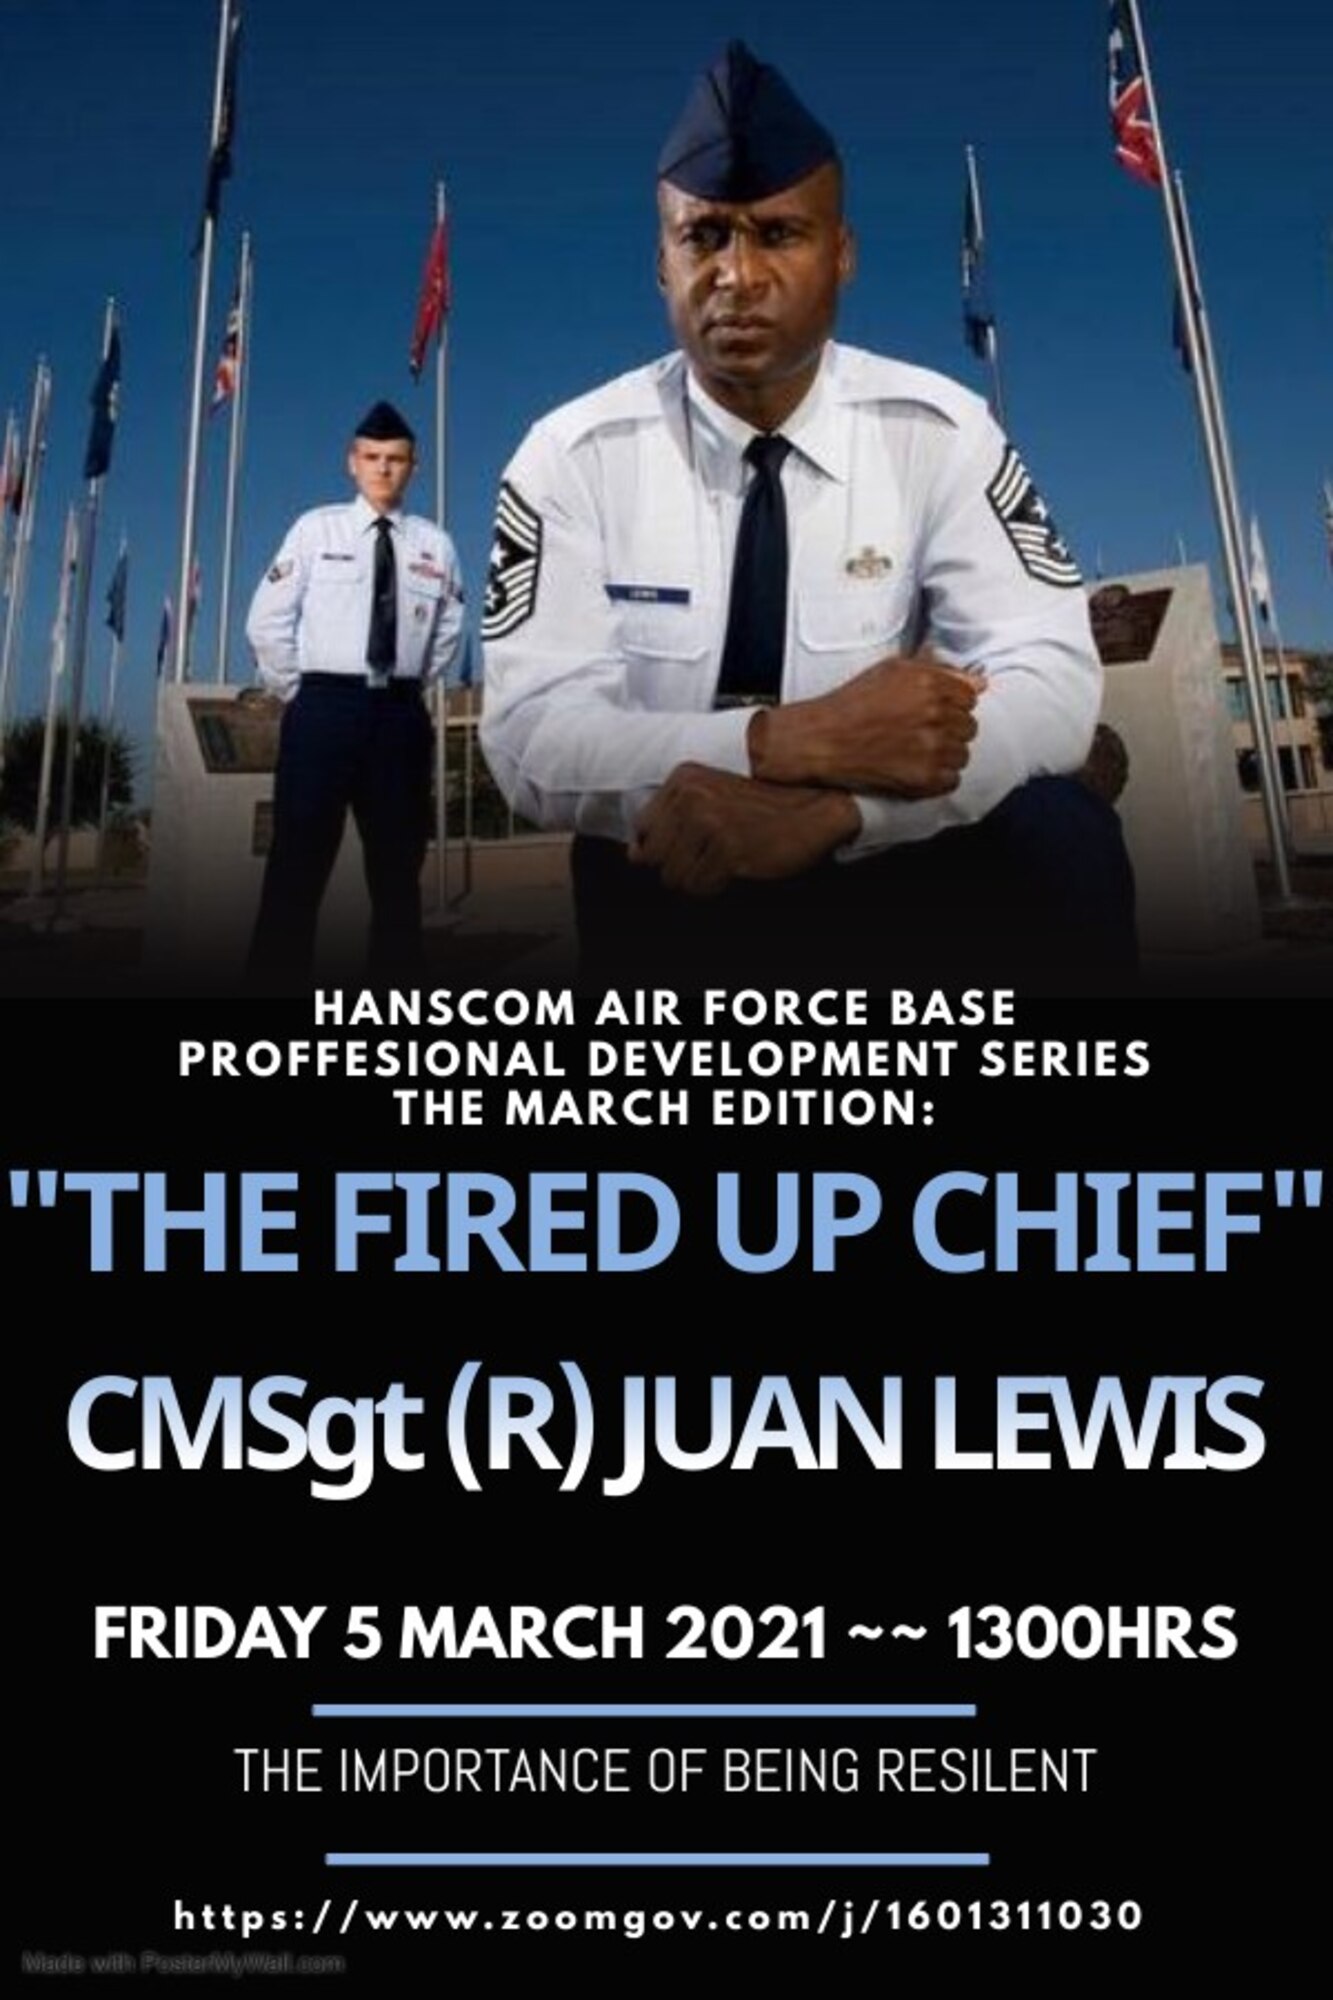 Retired Chief Master Sgt. Juan Lewis, also known as ‘The Fired up Chief,’ will speak to members of the Hanscom Air Force Base, Mass., workforce during a professional development event held via Zoom March 5. Lewis, who served on active duty for 28 years, delivers motivational speeches to military and civilian Airmen throughout the Air Force. (Courtesy graphic)